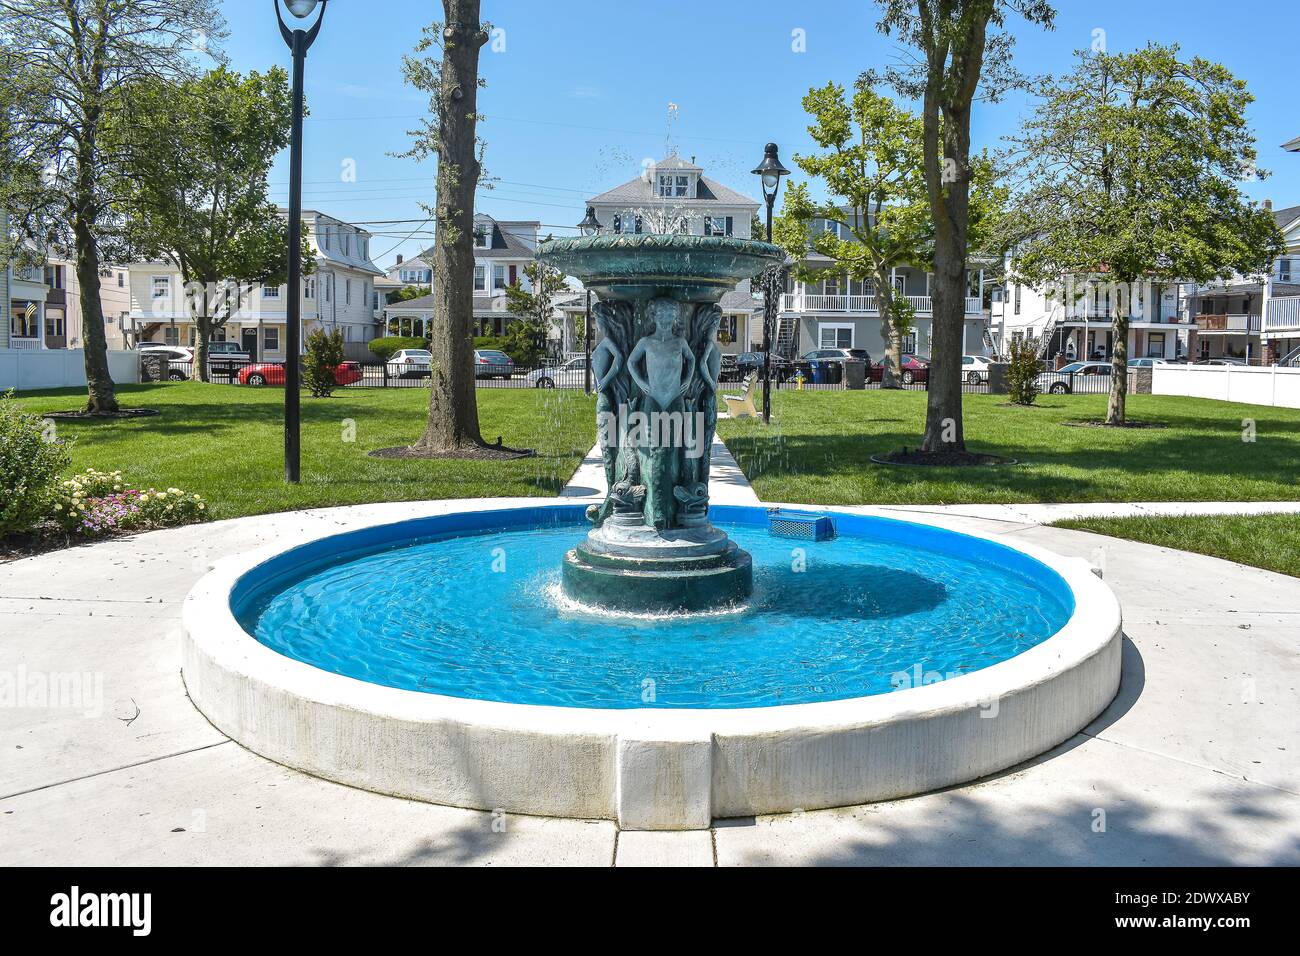 A flowing fountain during a nice summer day in the City of Wildwood in Cape May County New Jersey Stock Photo